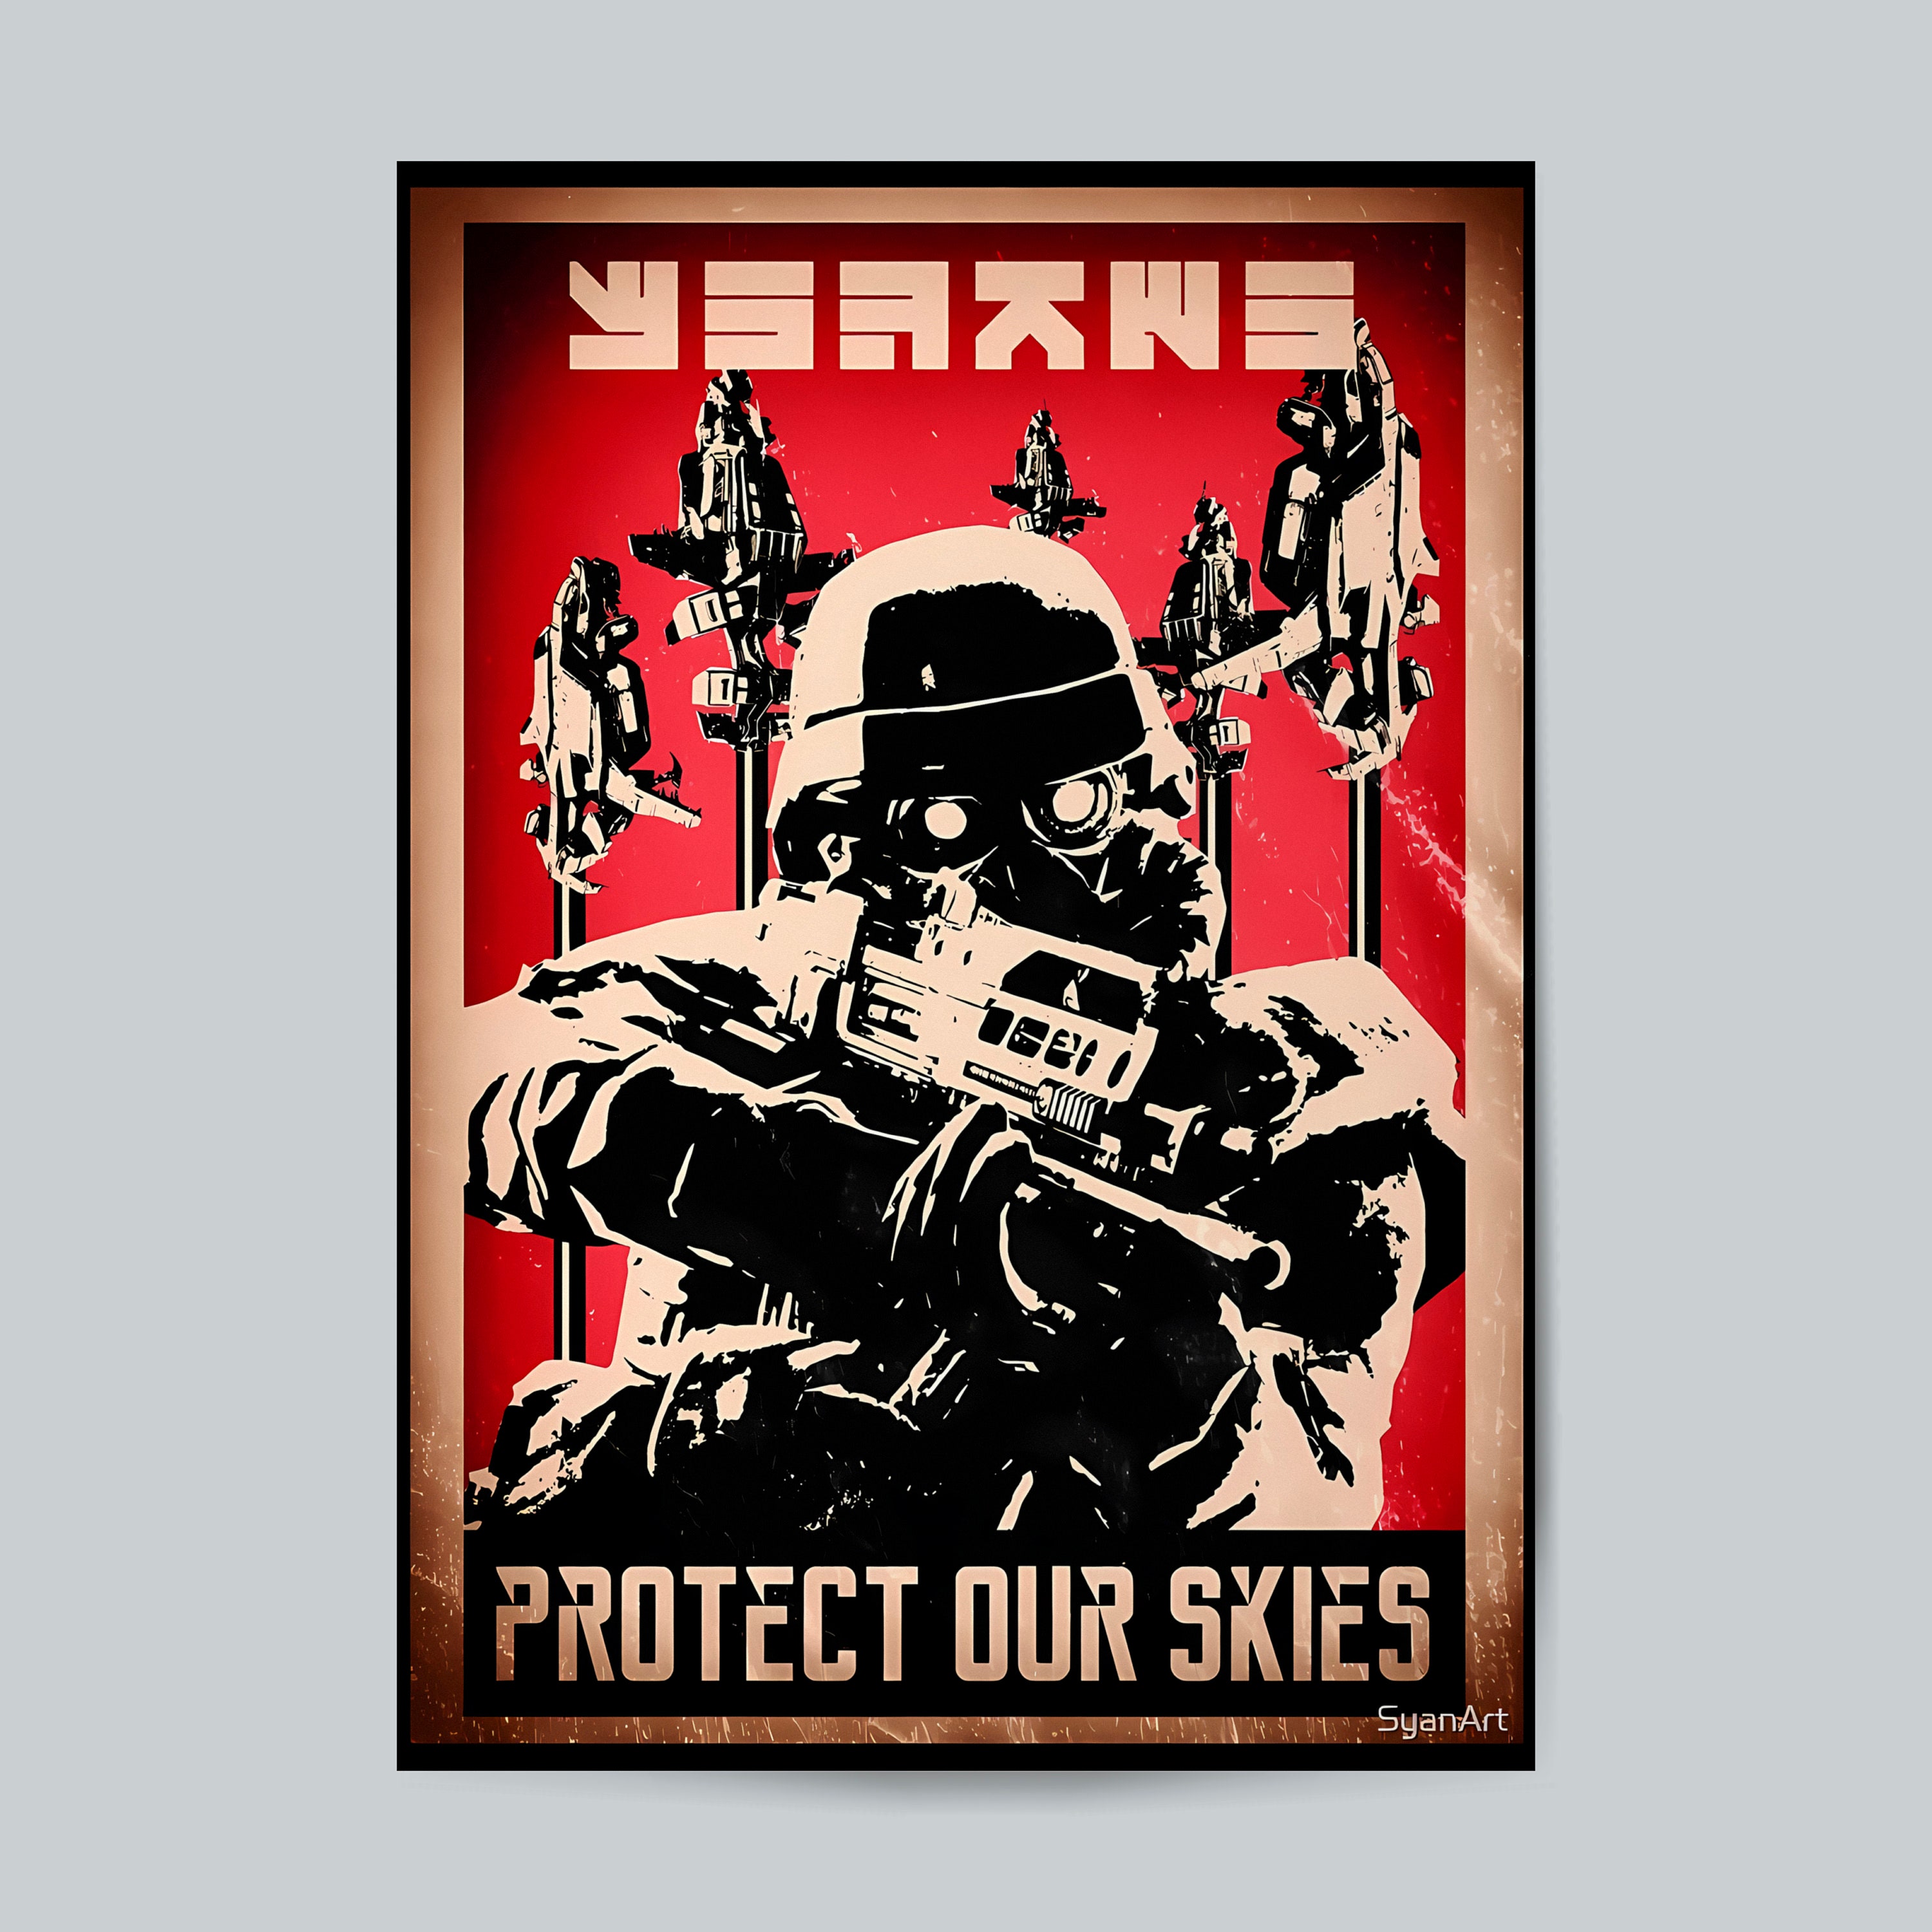 Killzone Poster Playstation Wall Art Video Games Picture 